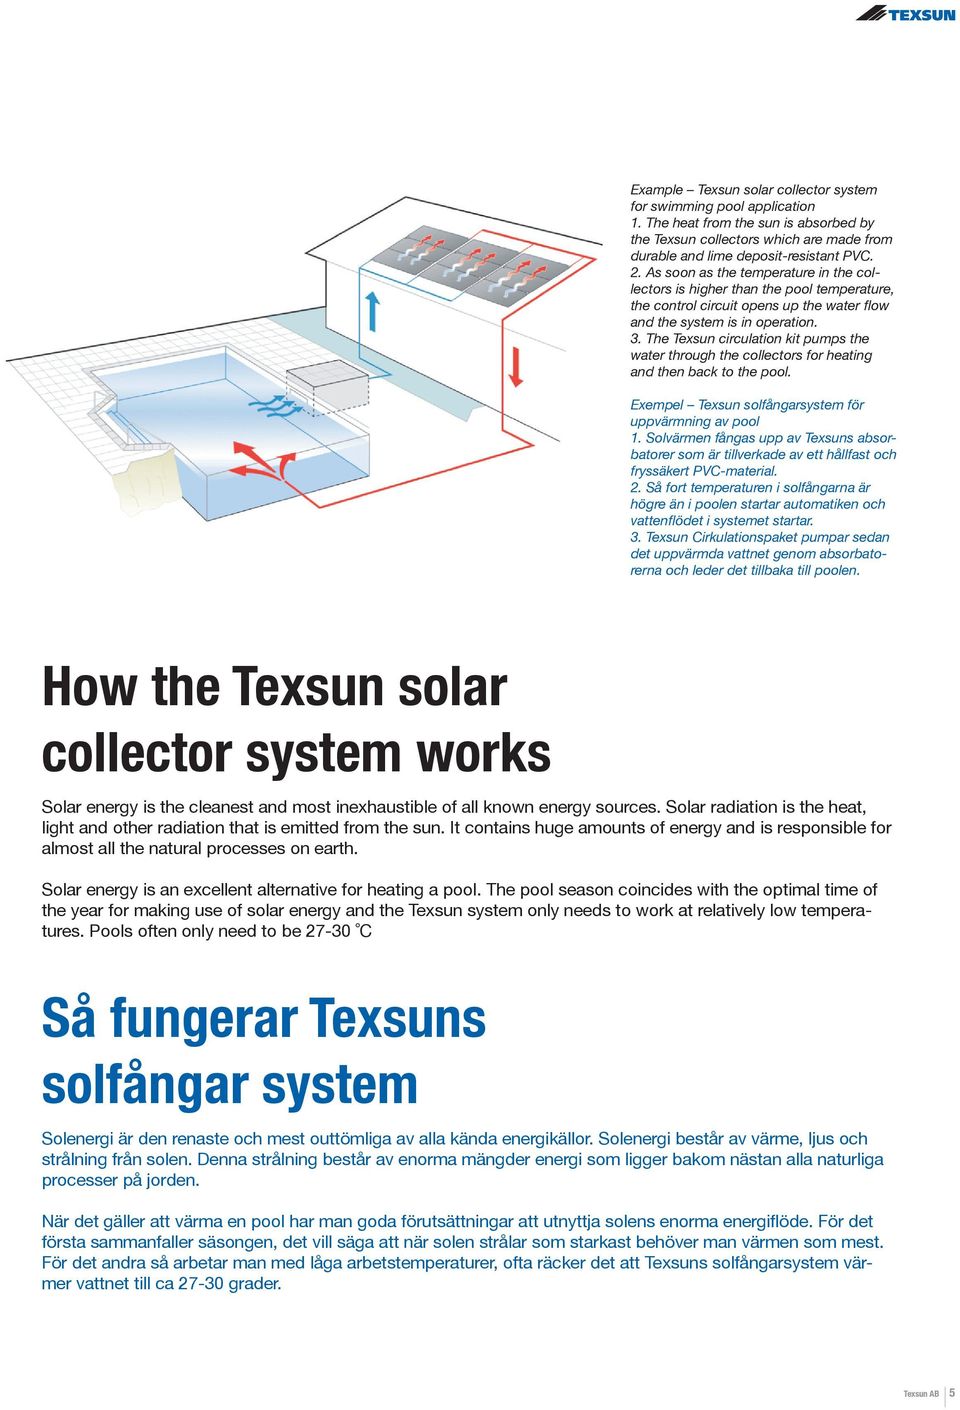 The Texsun circulation kit pumps the water through the collectors for heating and then back to the pool. Exempel Texsun solfångarsystem för uppvärmning av pool 1.